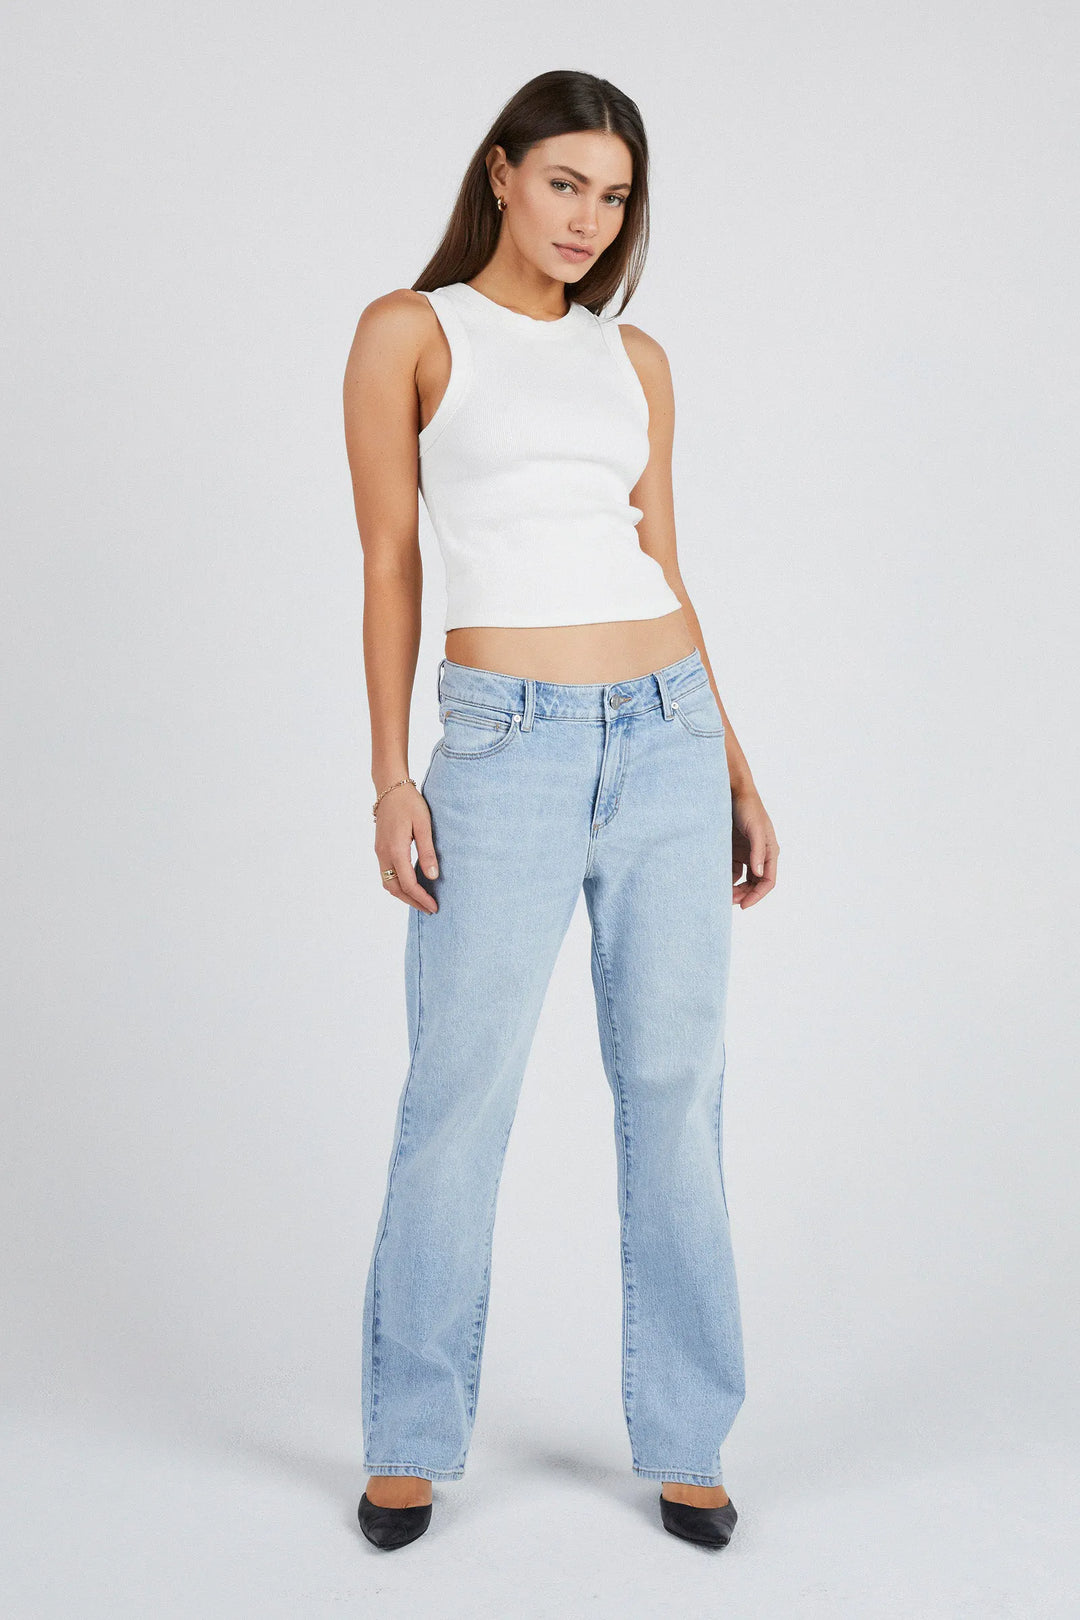 Abrand 99 Baggy Jean - Gina Recycled Light Vintage Blue